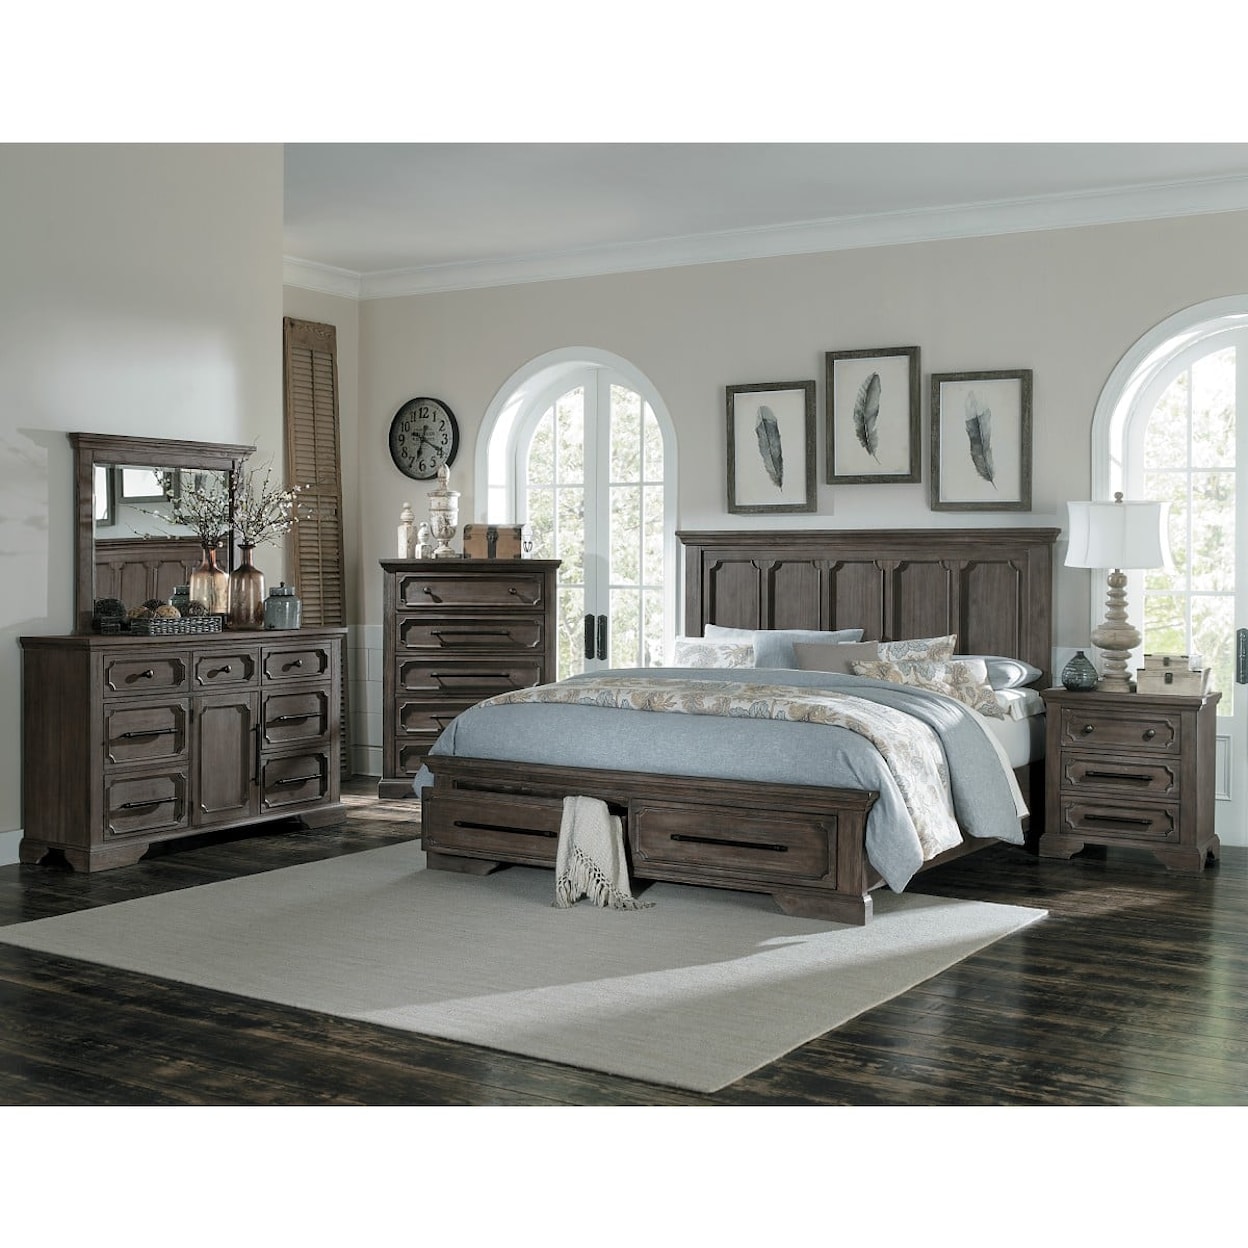 Homelegance Toulon King  Bed with FB Storage